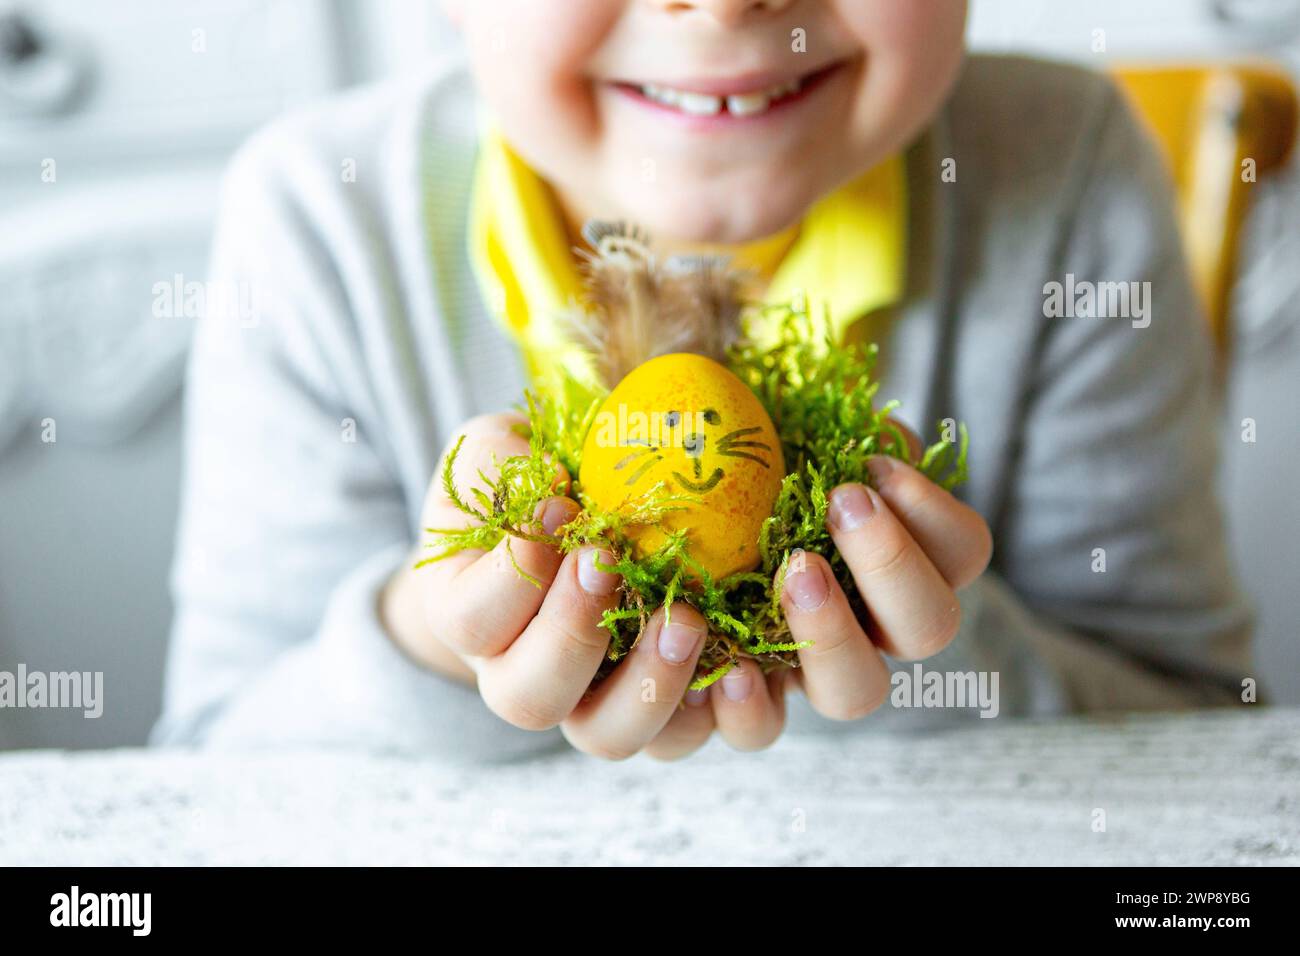 3 March 2024: Child holding a self-made Easter egg with bunny ears and face for Easter. Easter nest *** Kind hält ein selbstgebasteltes Osterei mit Hasenohren und Gesicht zu Ostern. Osternest Stock Photo